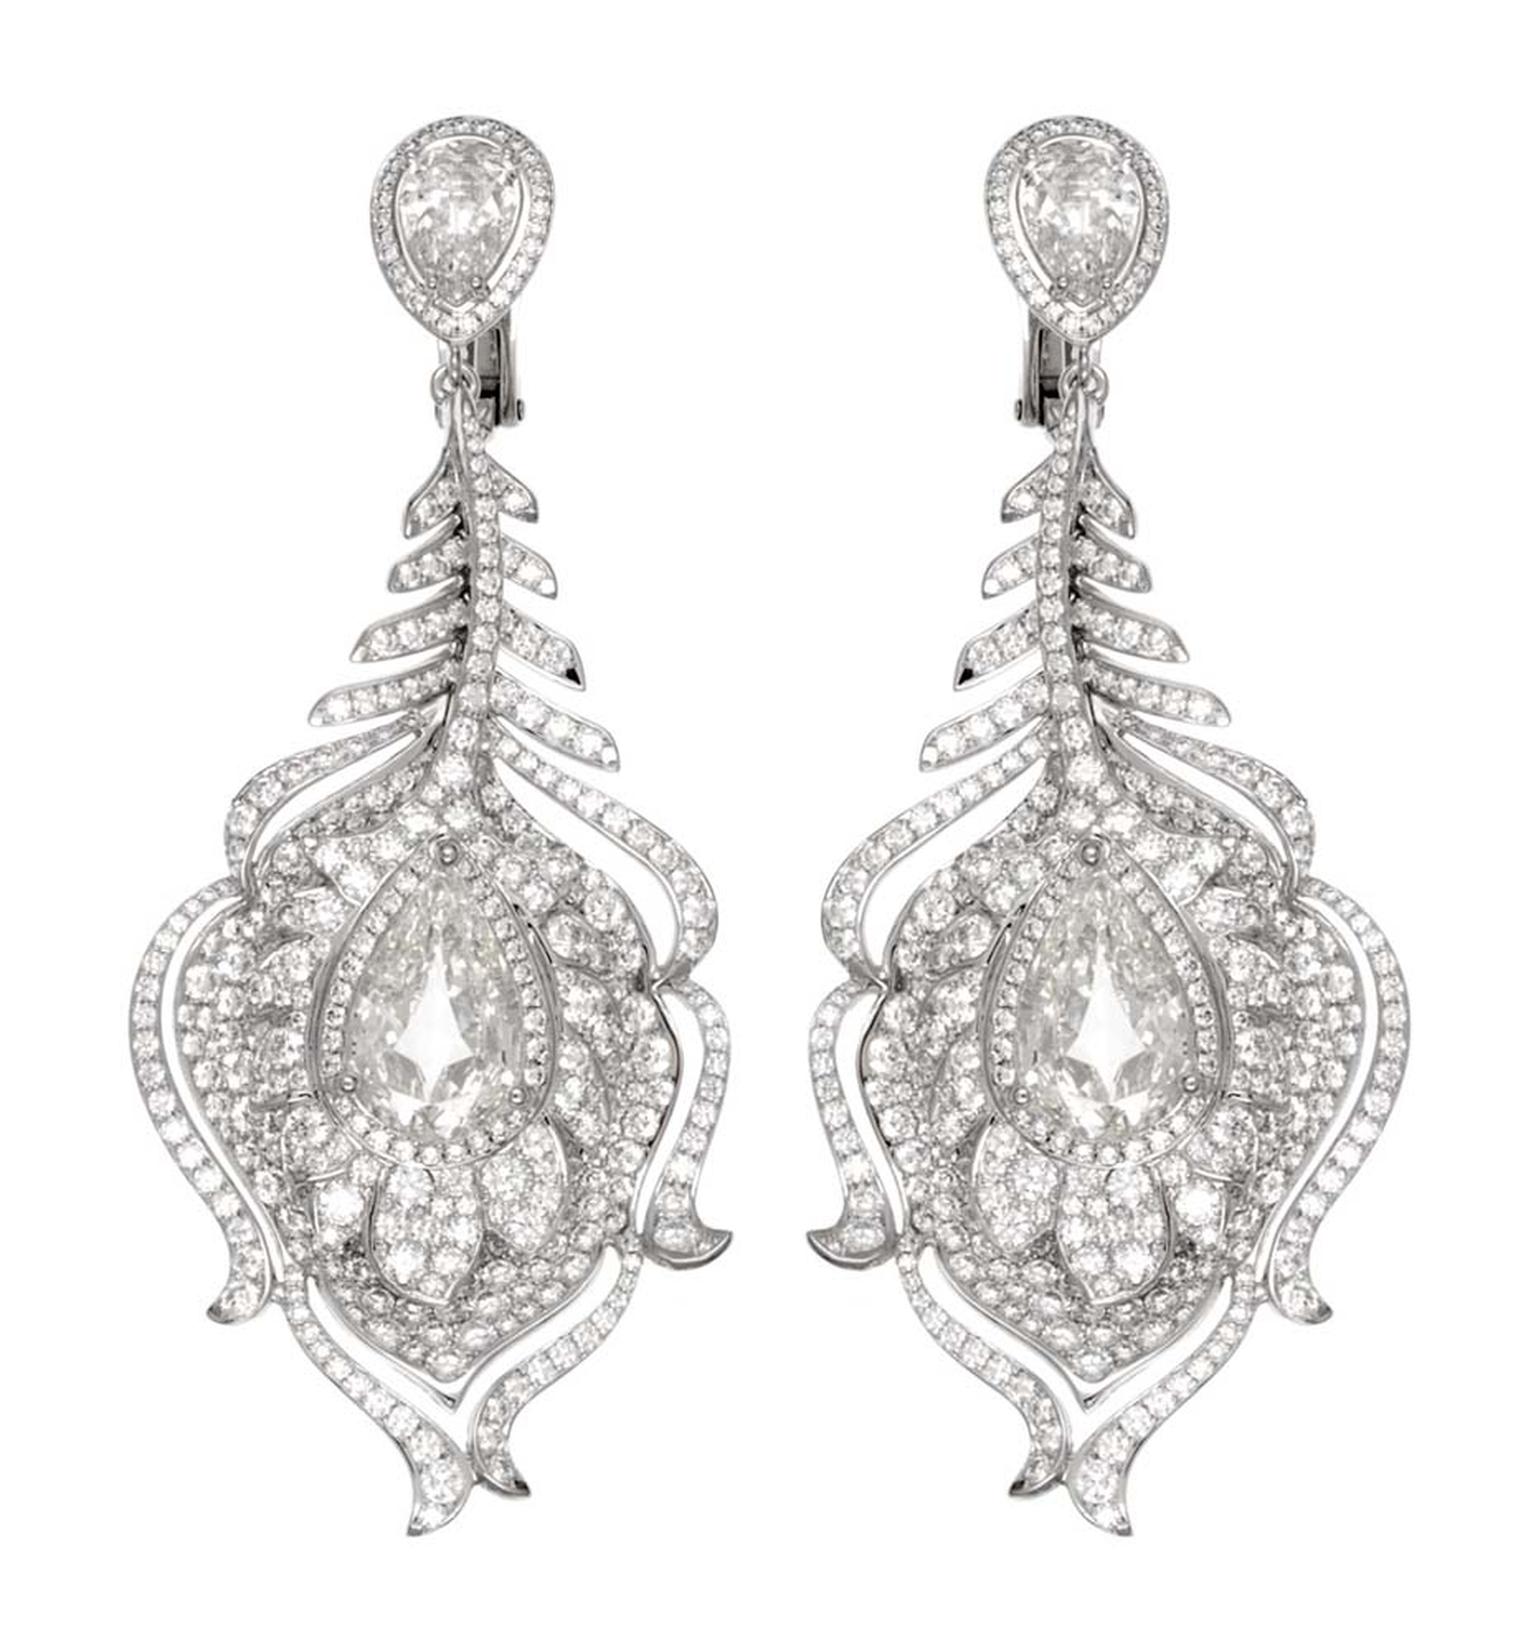 Chopard Red Carpet Collection diamond earrings in white gold (£POA).